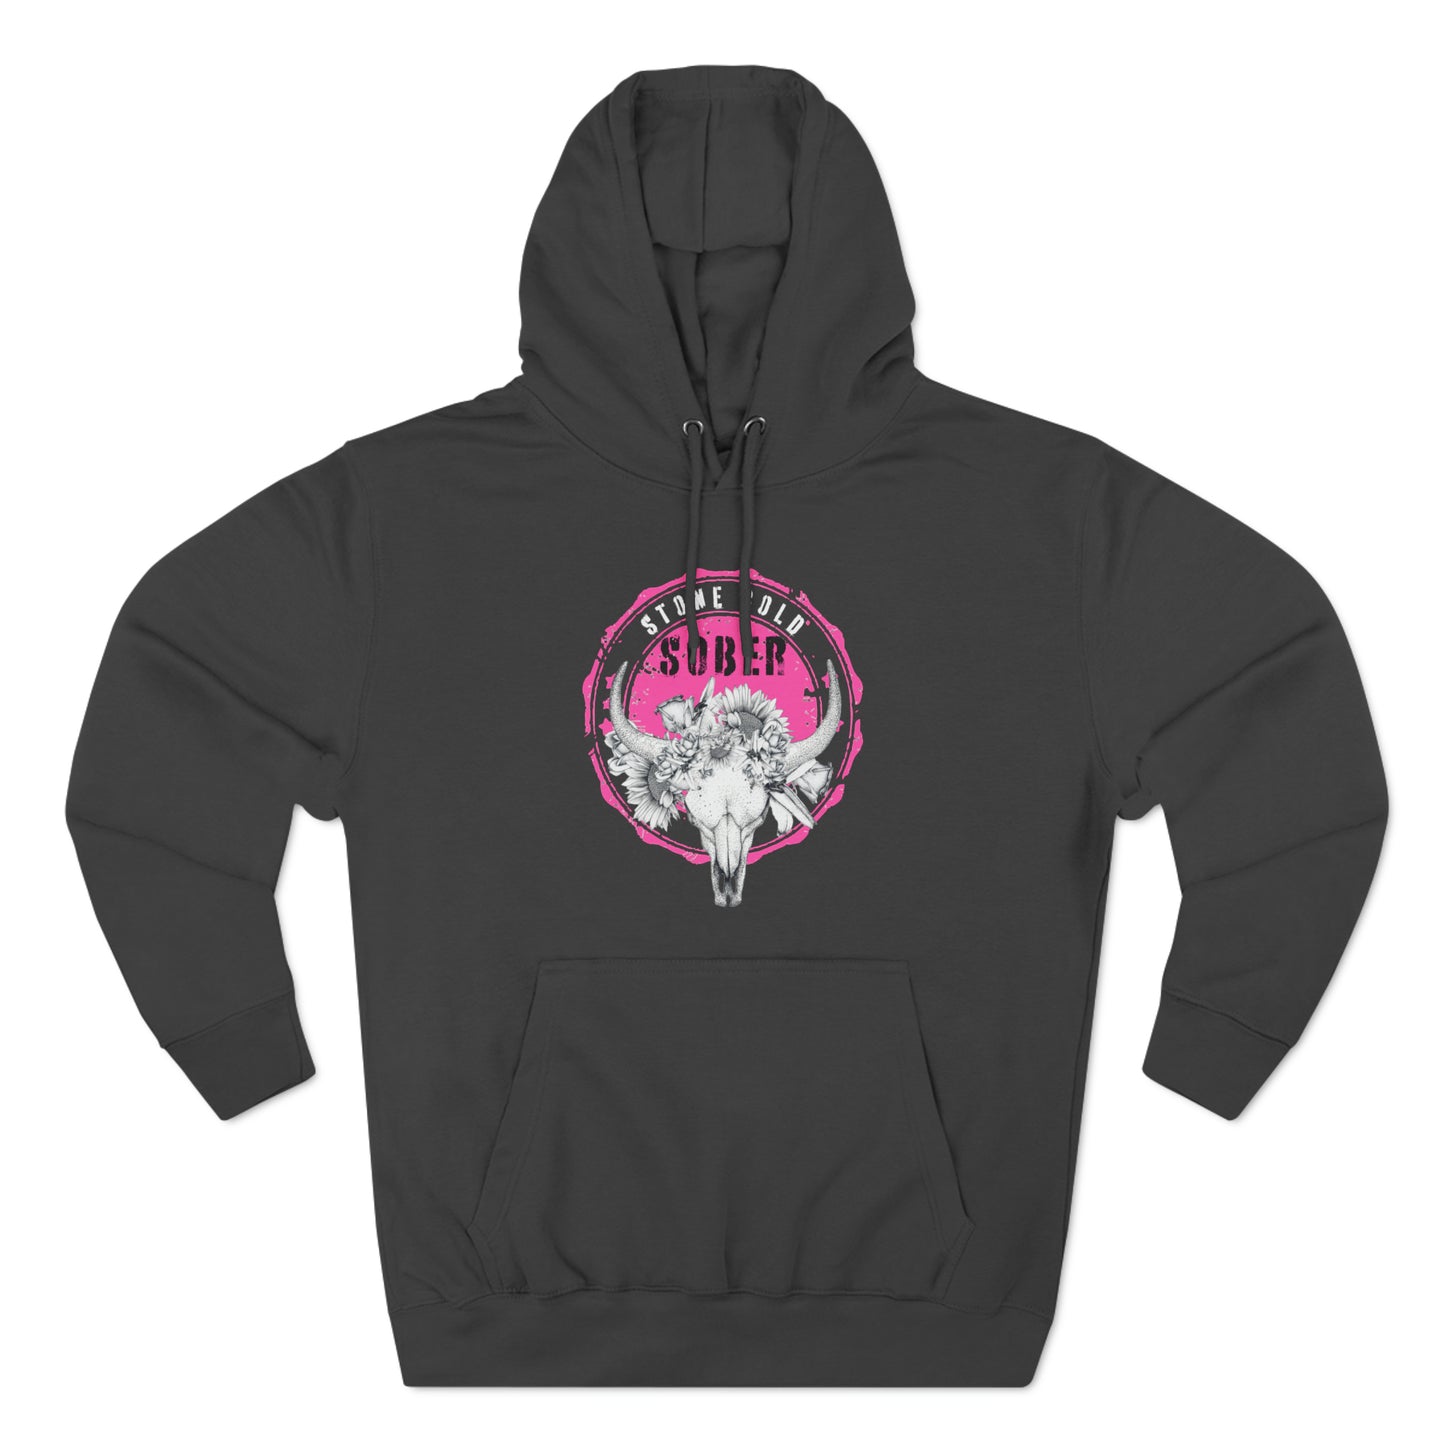 "Stone Cold Sober" Pink Skull Hoodie